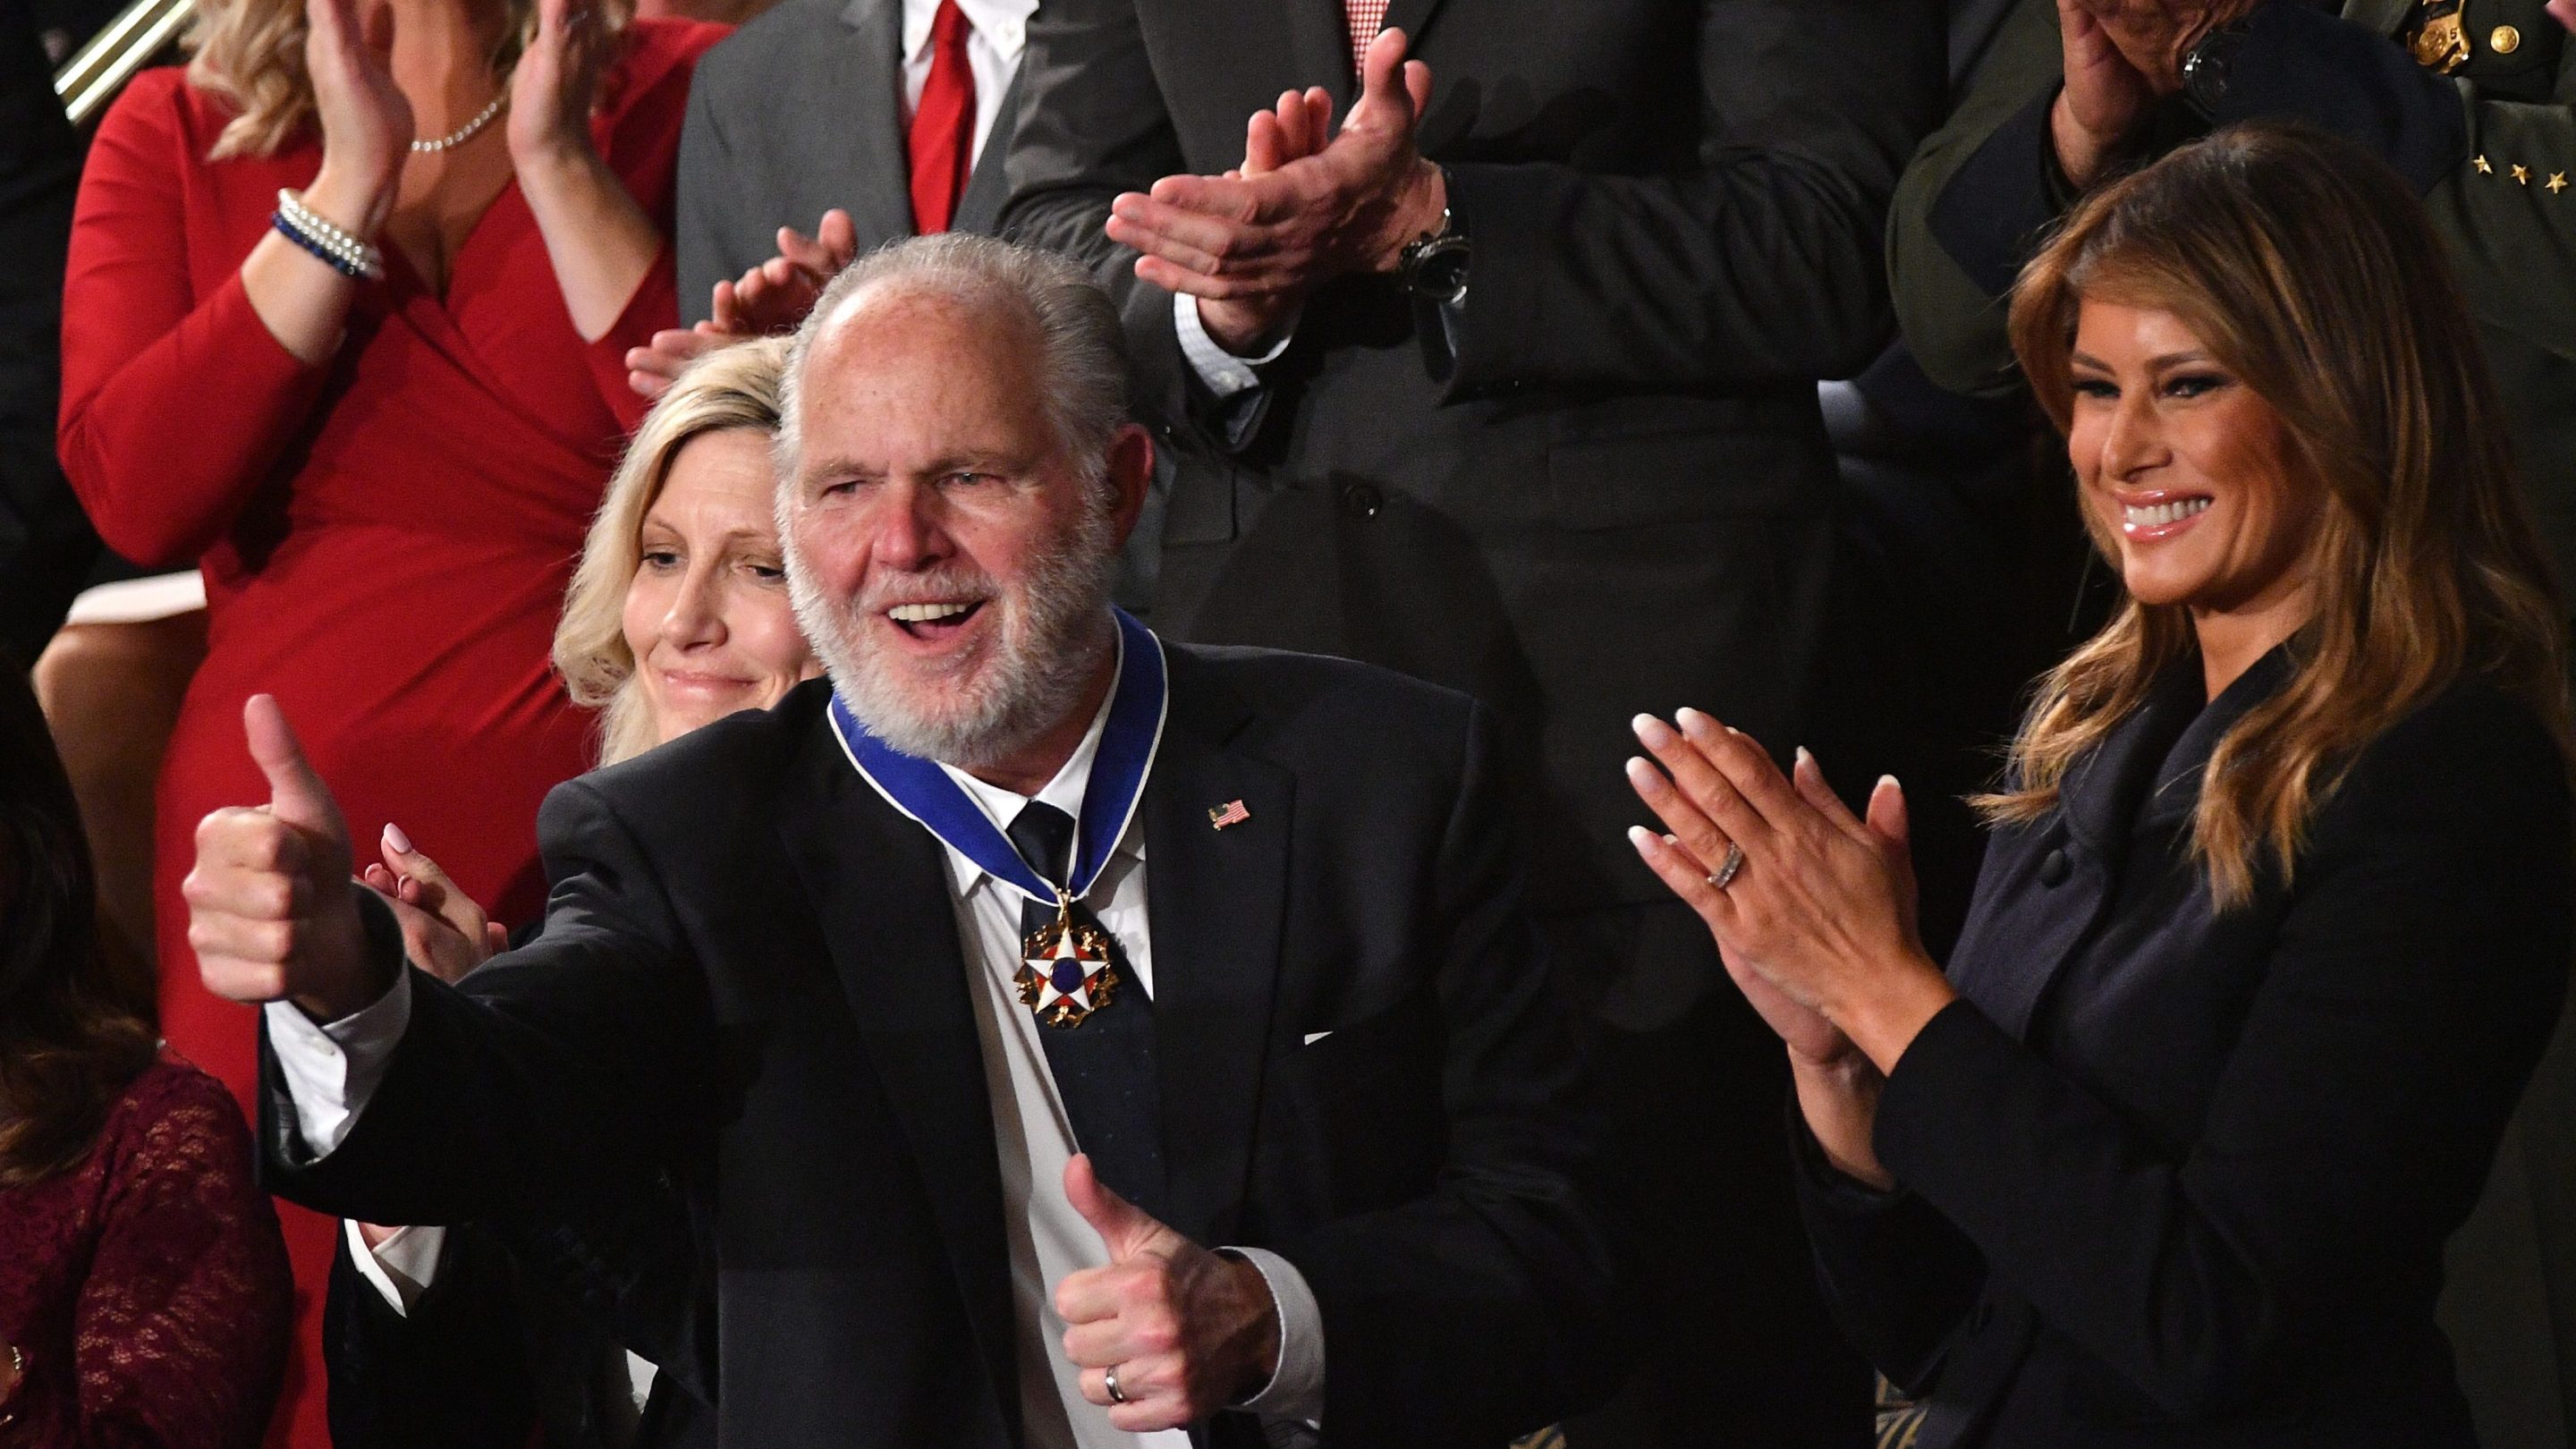 Rush Limbaugh, who has since died, celebrates after receiving the Presidential Medal of Freedom.